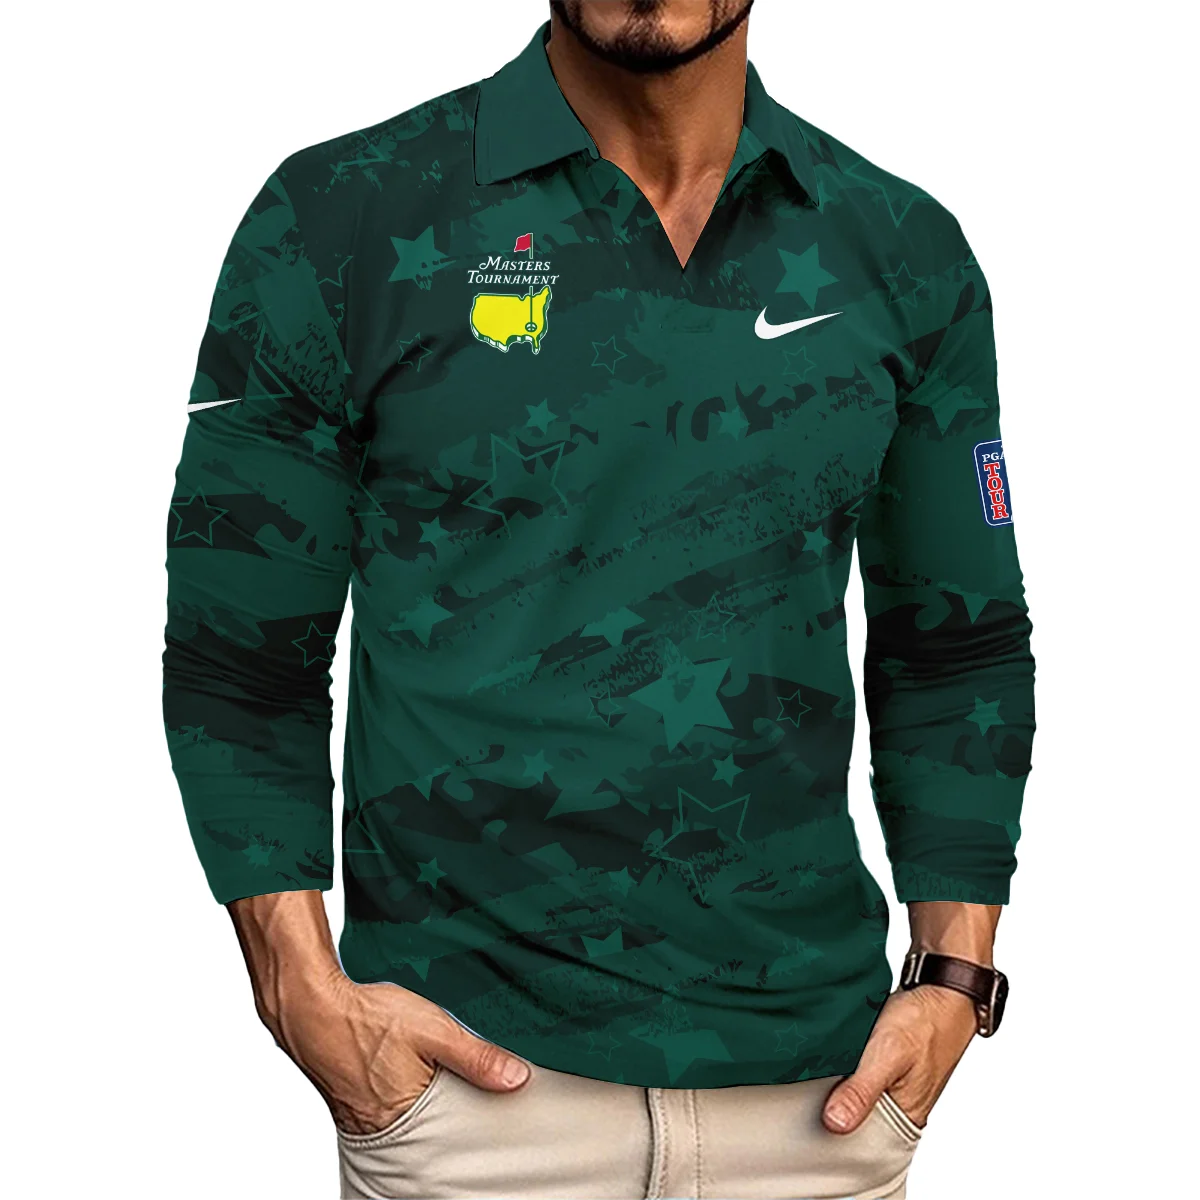 Dark Green Stars Pattern Grunge Background Masters Tournament Nike Vneck Polo Shirt Style Classic Polo Shirt For Men